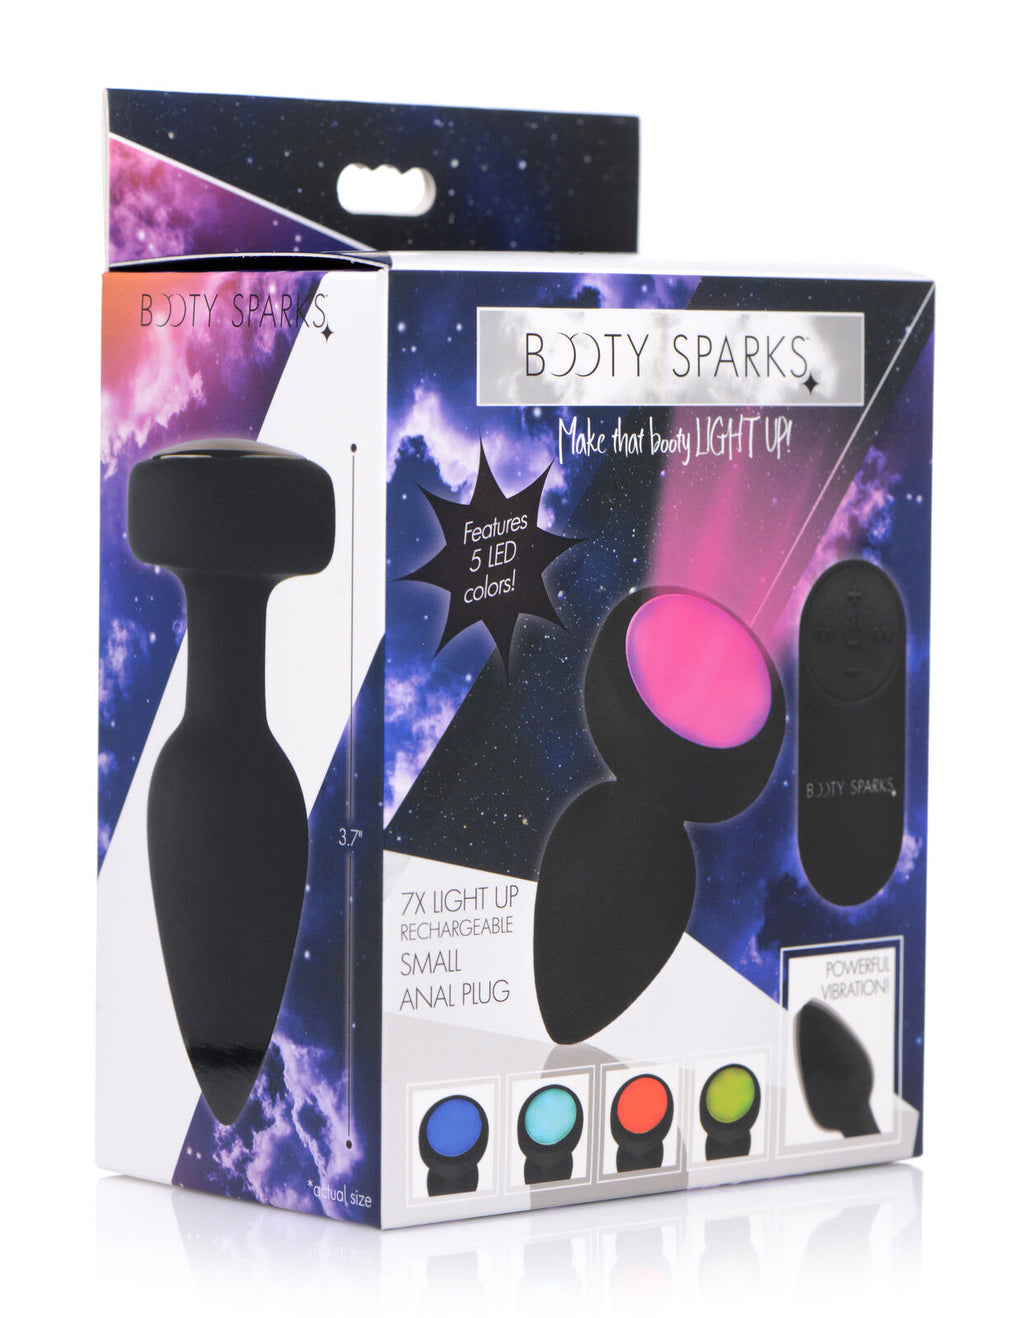 Booty Sparks 7X Light Up Anal Plug - Small